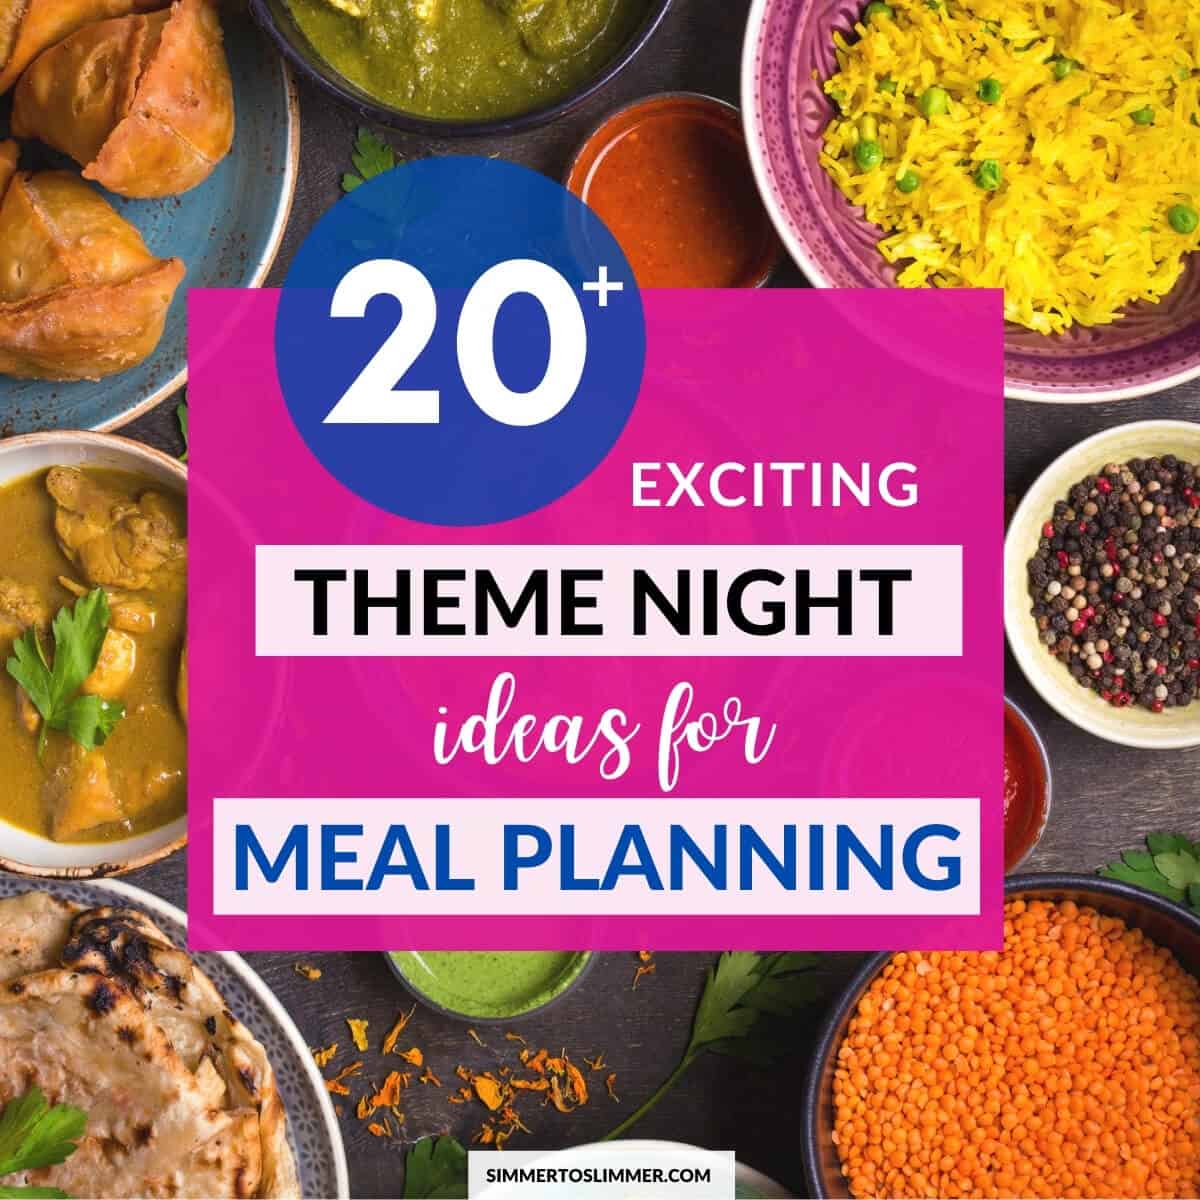 20+ Theme Ideas for Meal Planning